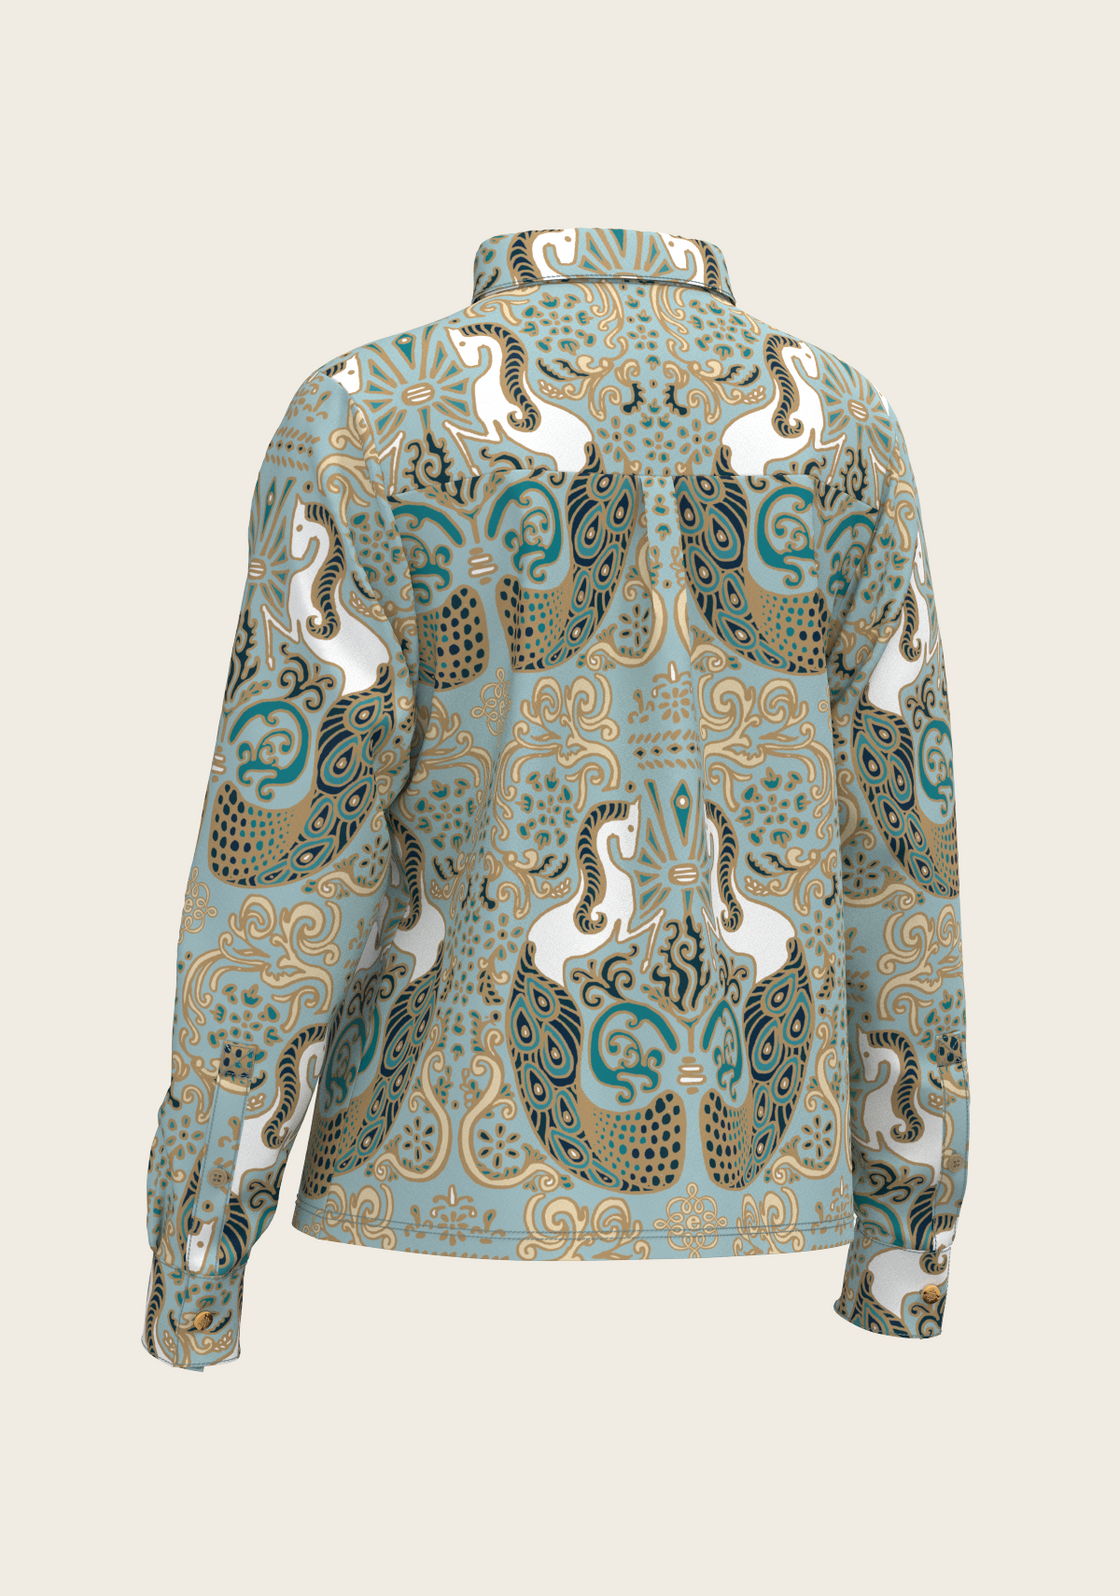 Mermaid Horses on Sky Blue Loose Fitting Button Shirt